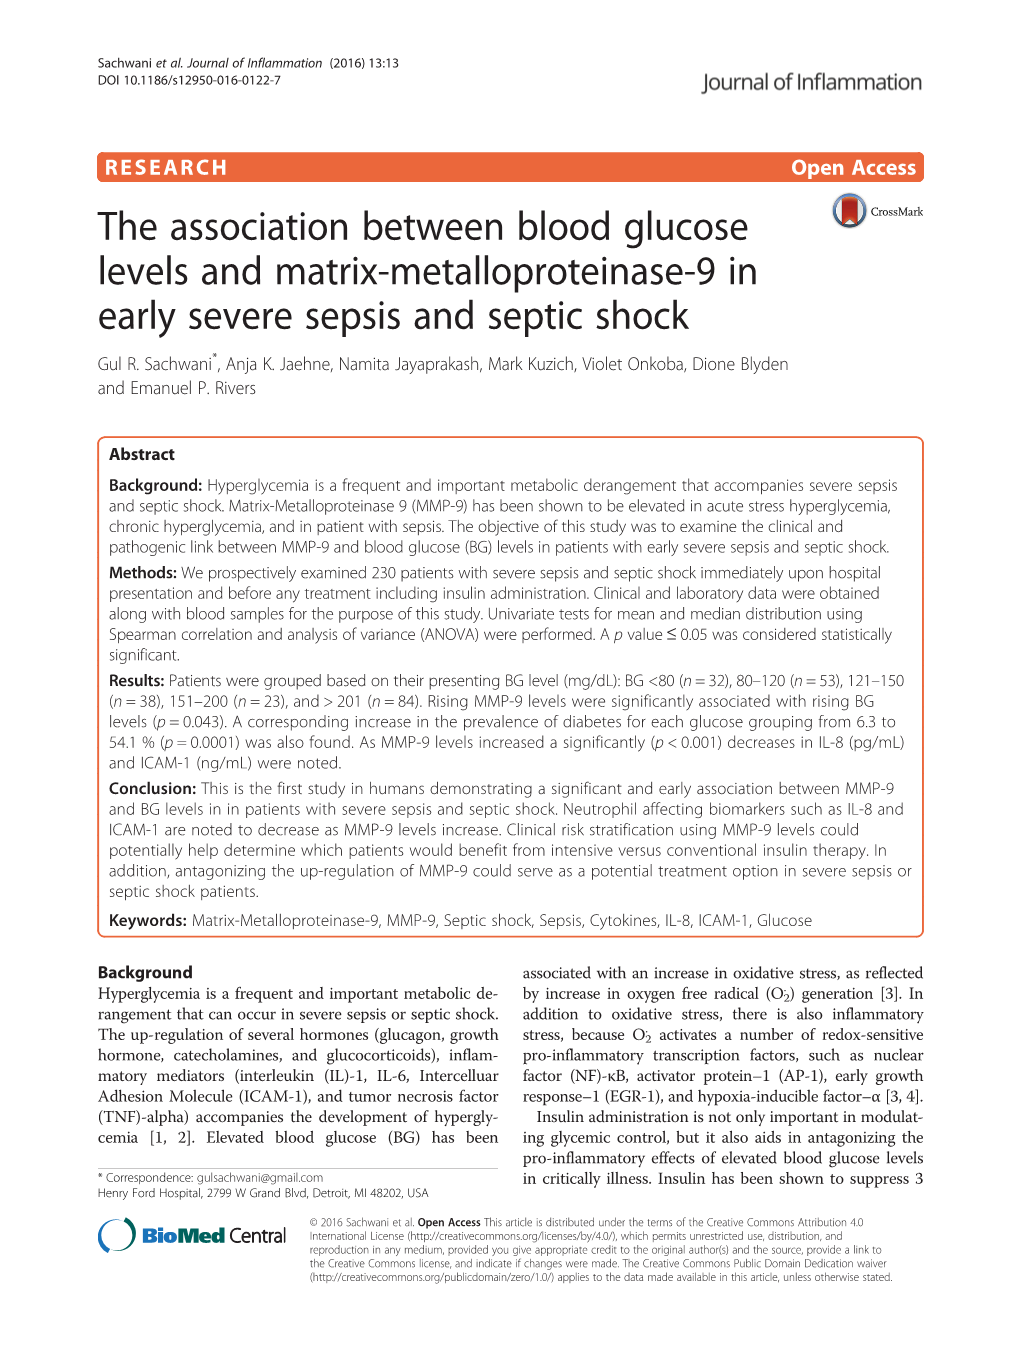 The Association Between Blood Glucose Levels and Matrix-Metalloproteinase-9 in Early Severe Sepsis and Septic Shock Gul R